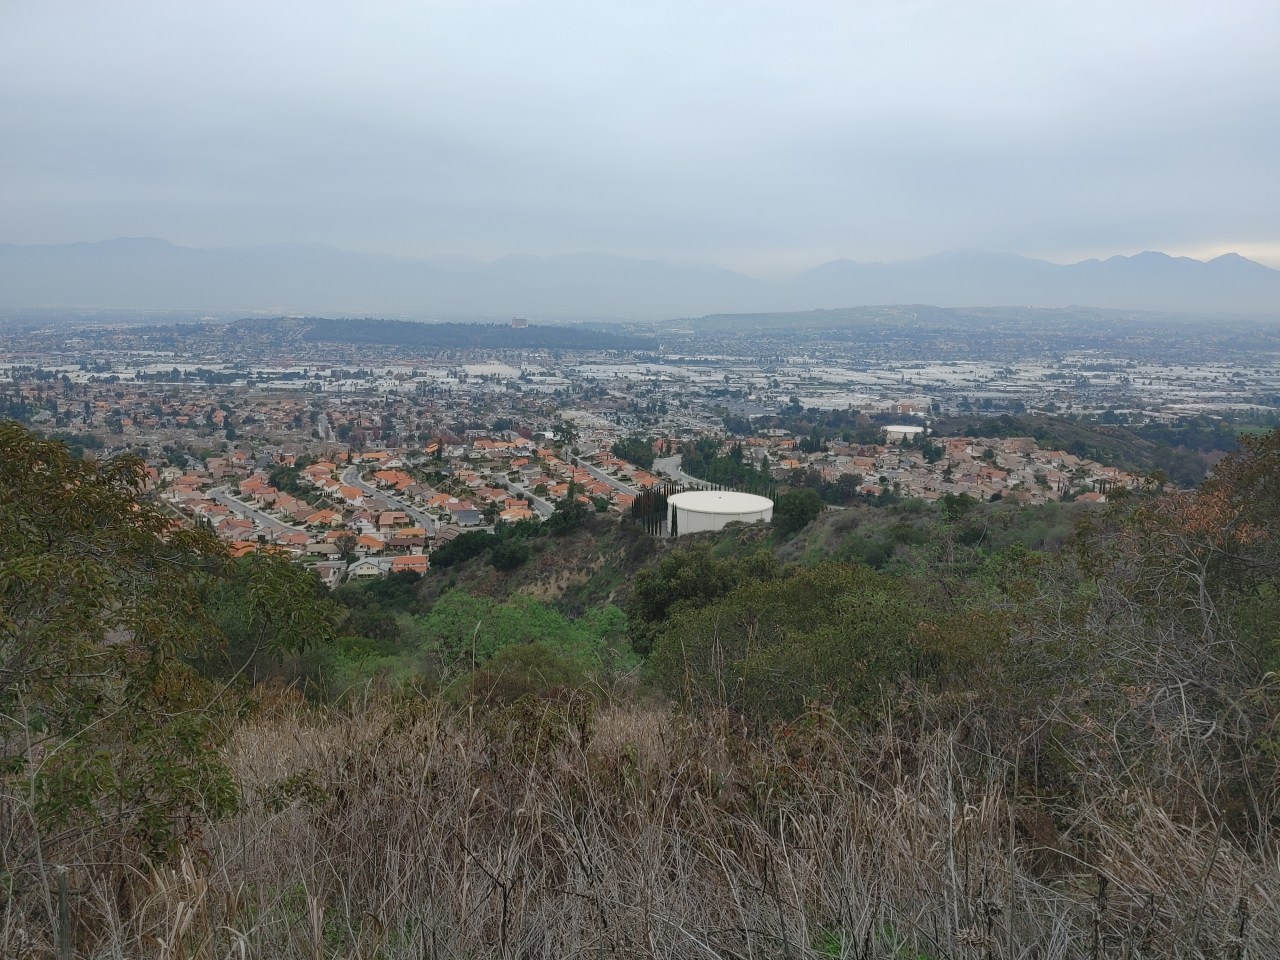 View of the San Gabriel Valley from the Schabarum-Skyline Trail in the Puente Hills. To the left is Little La Puente Hill, to the right are the San Jose Hills, and in the distance are the San Gabriel Mountains. Credit: Chris Greenspon/SBLA